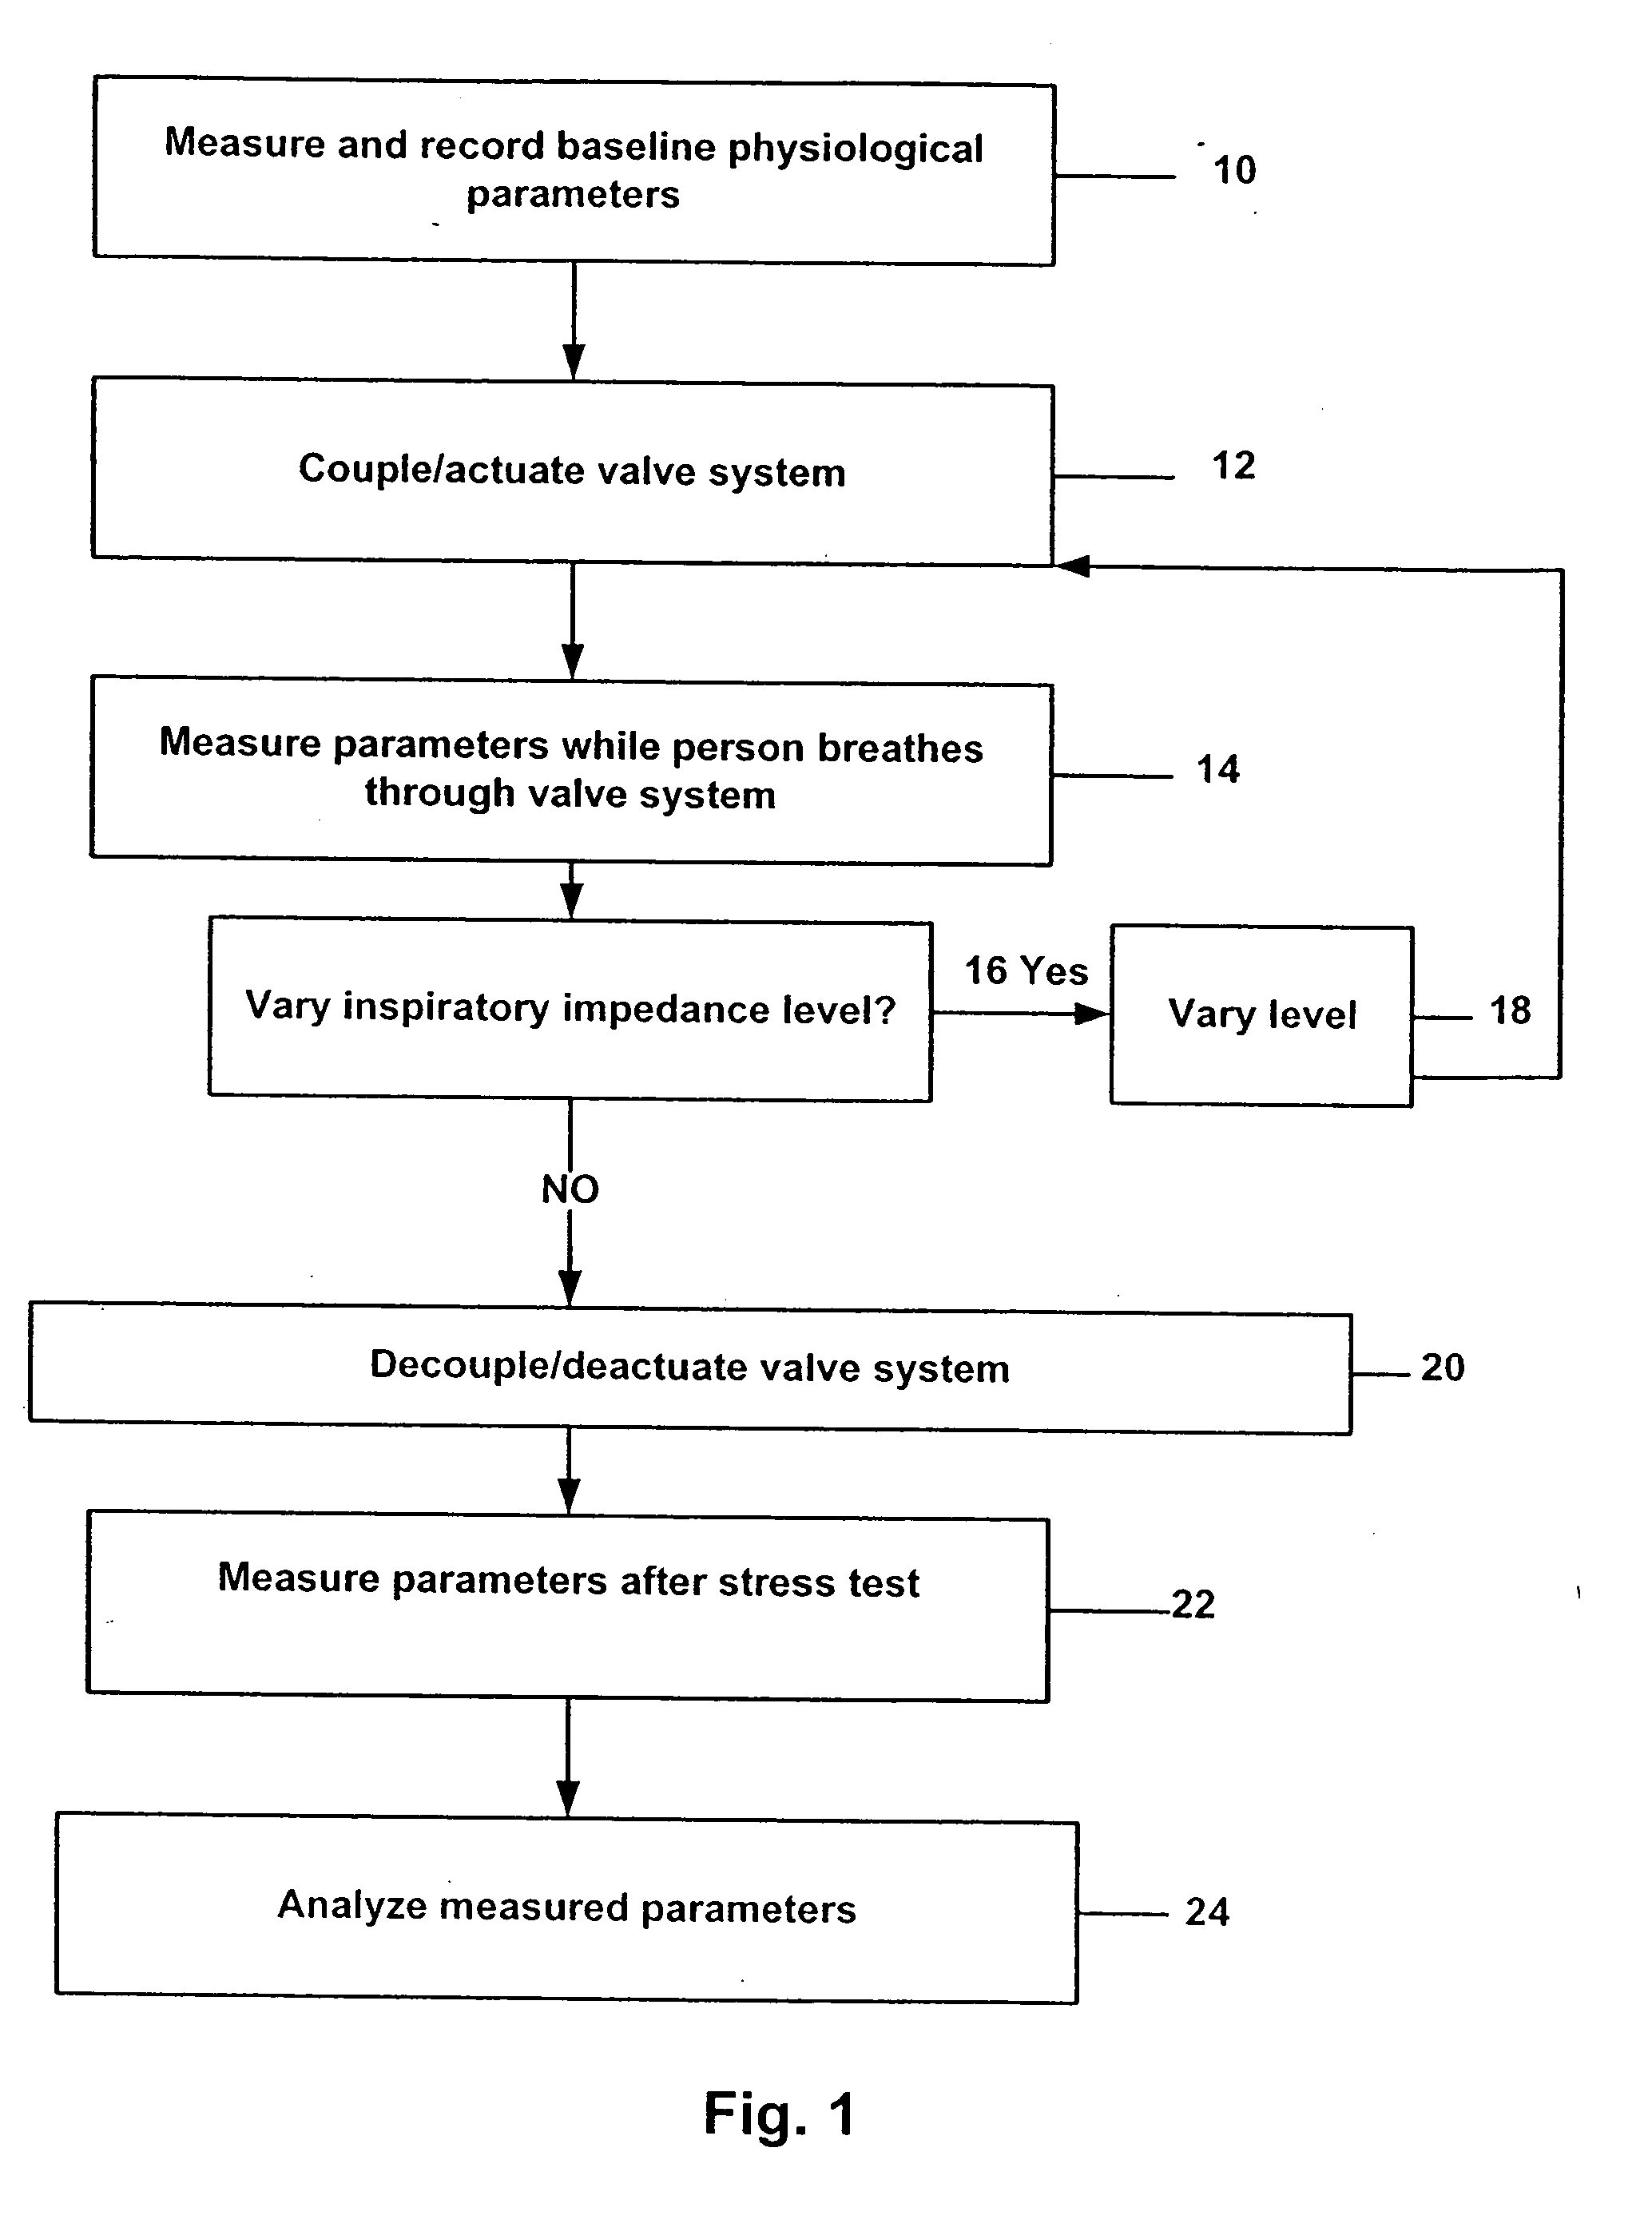 Stress test devices and methods